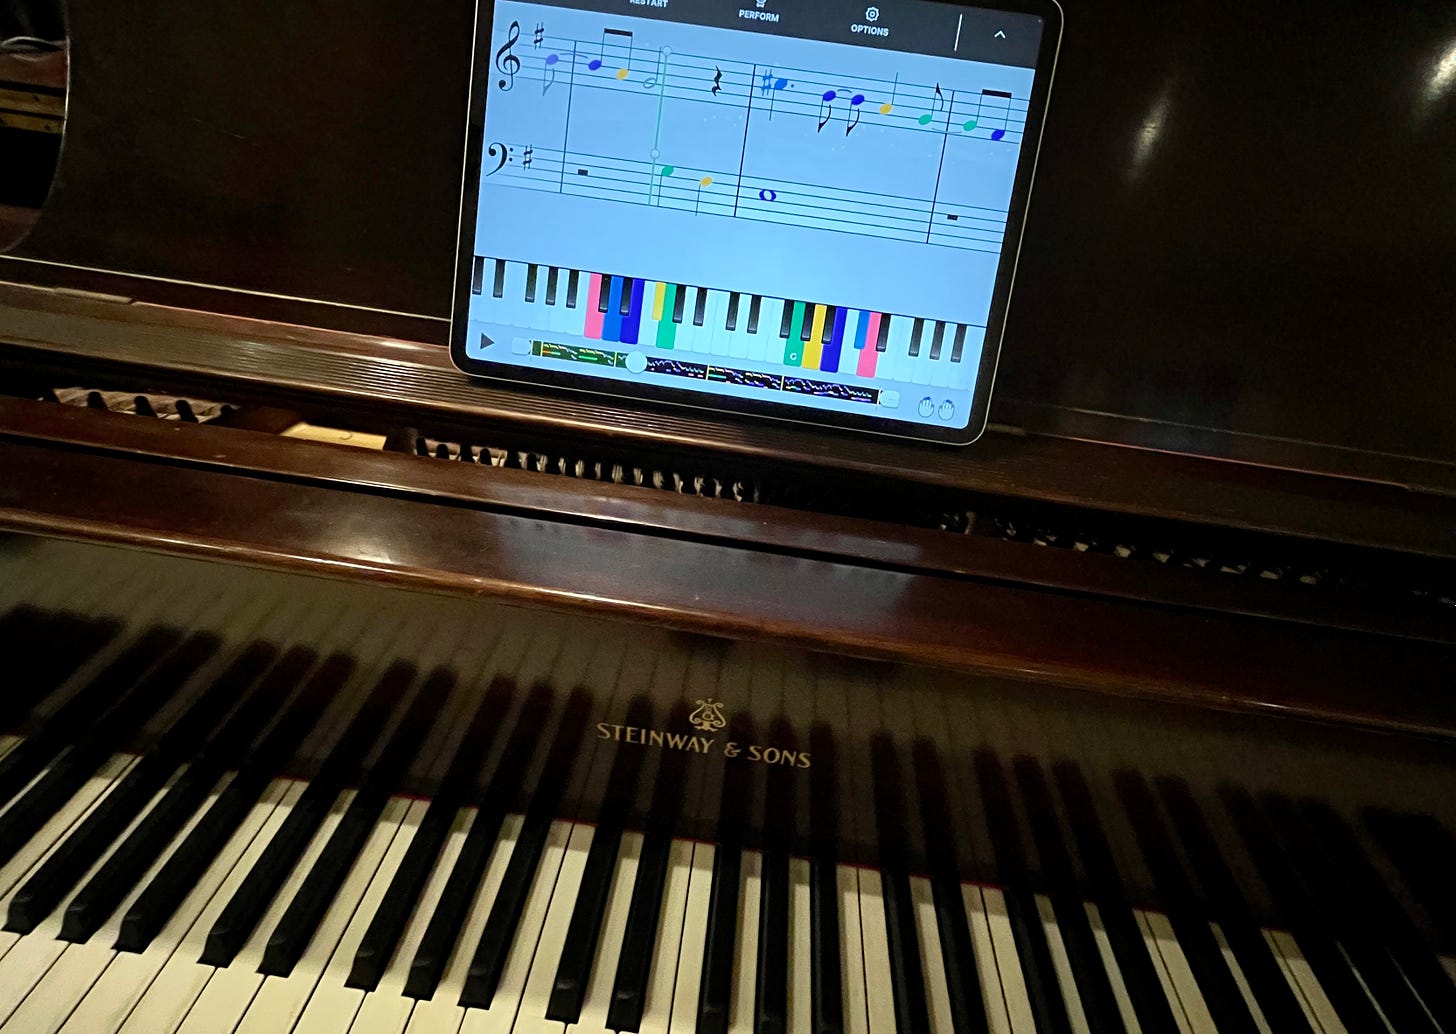 Steinway piano with Yousician app on iPad